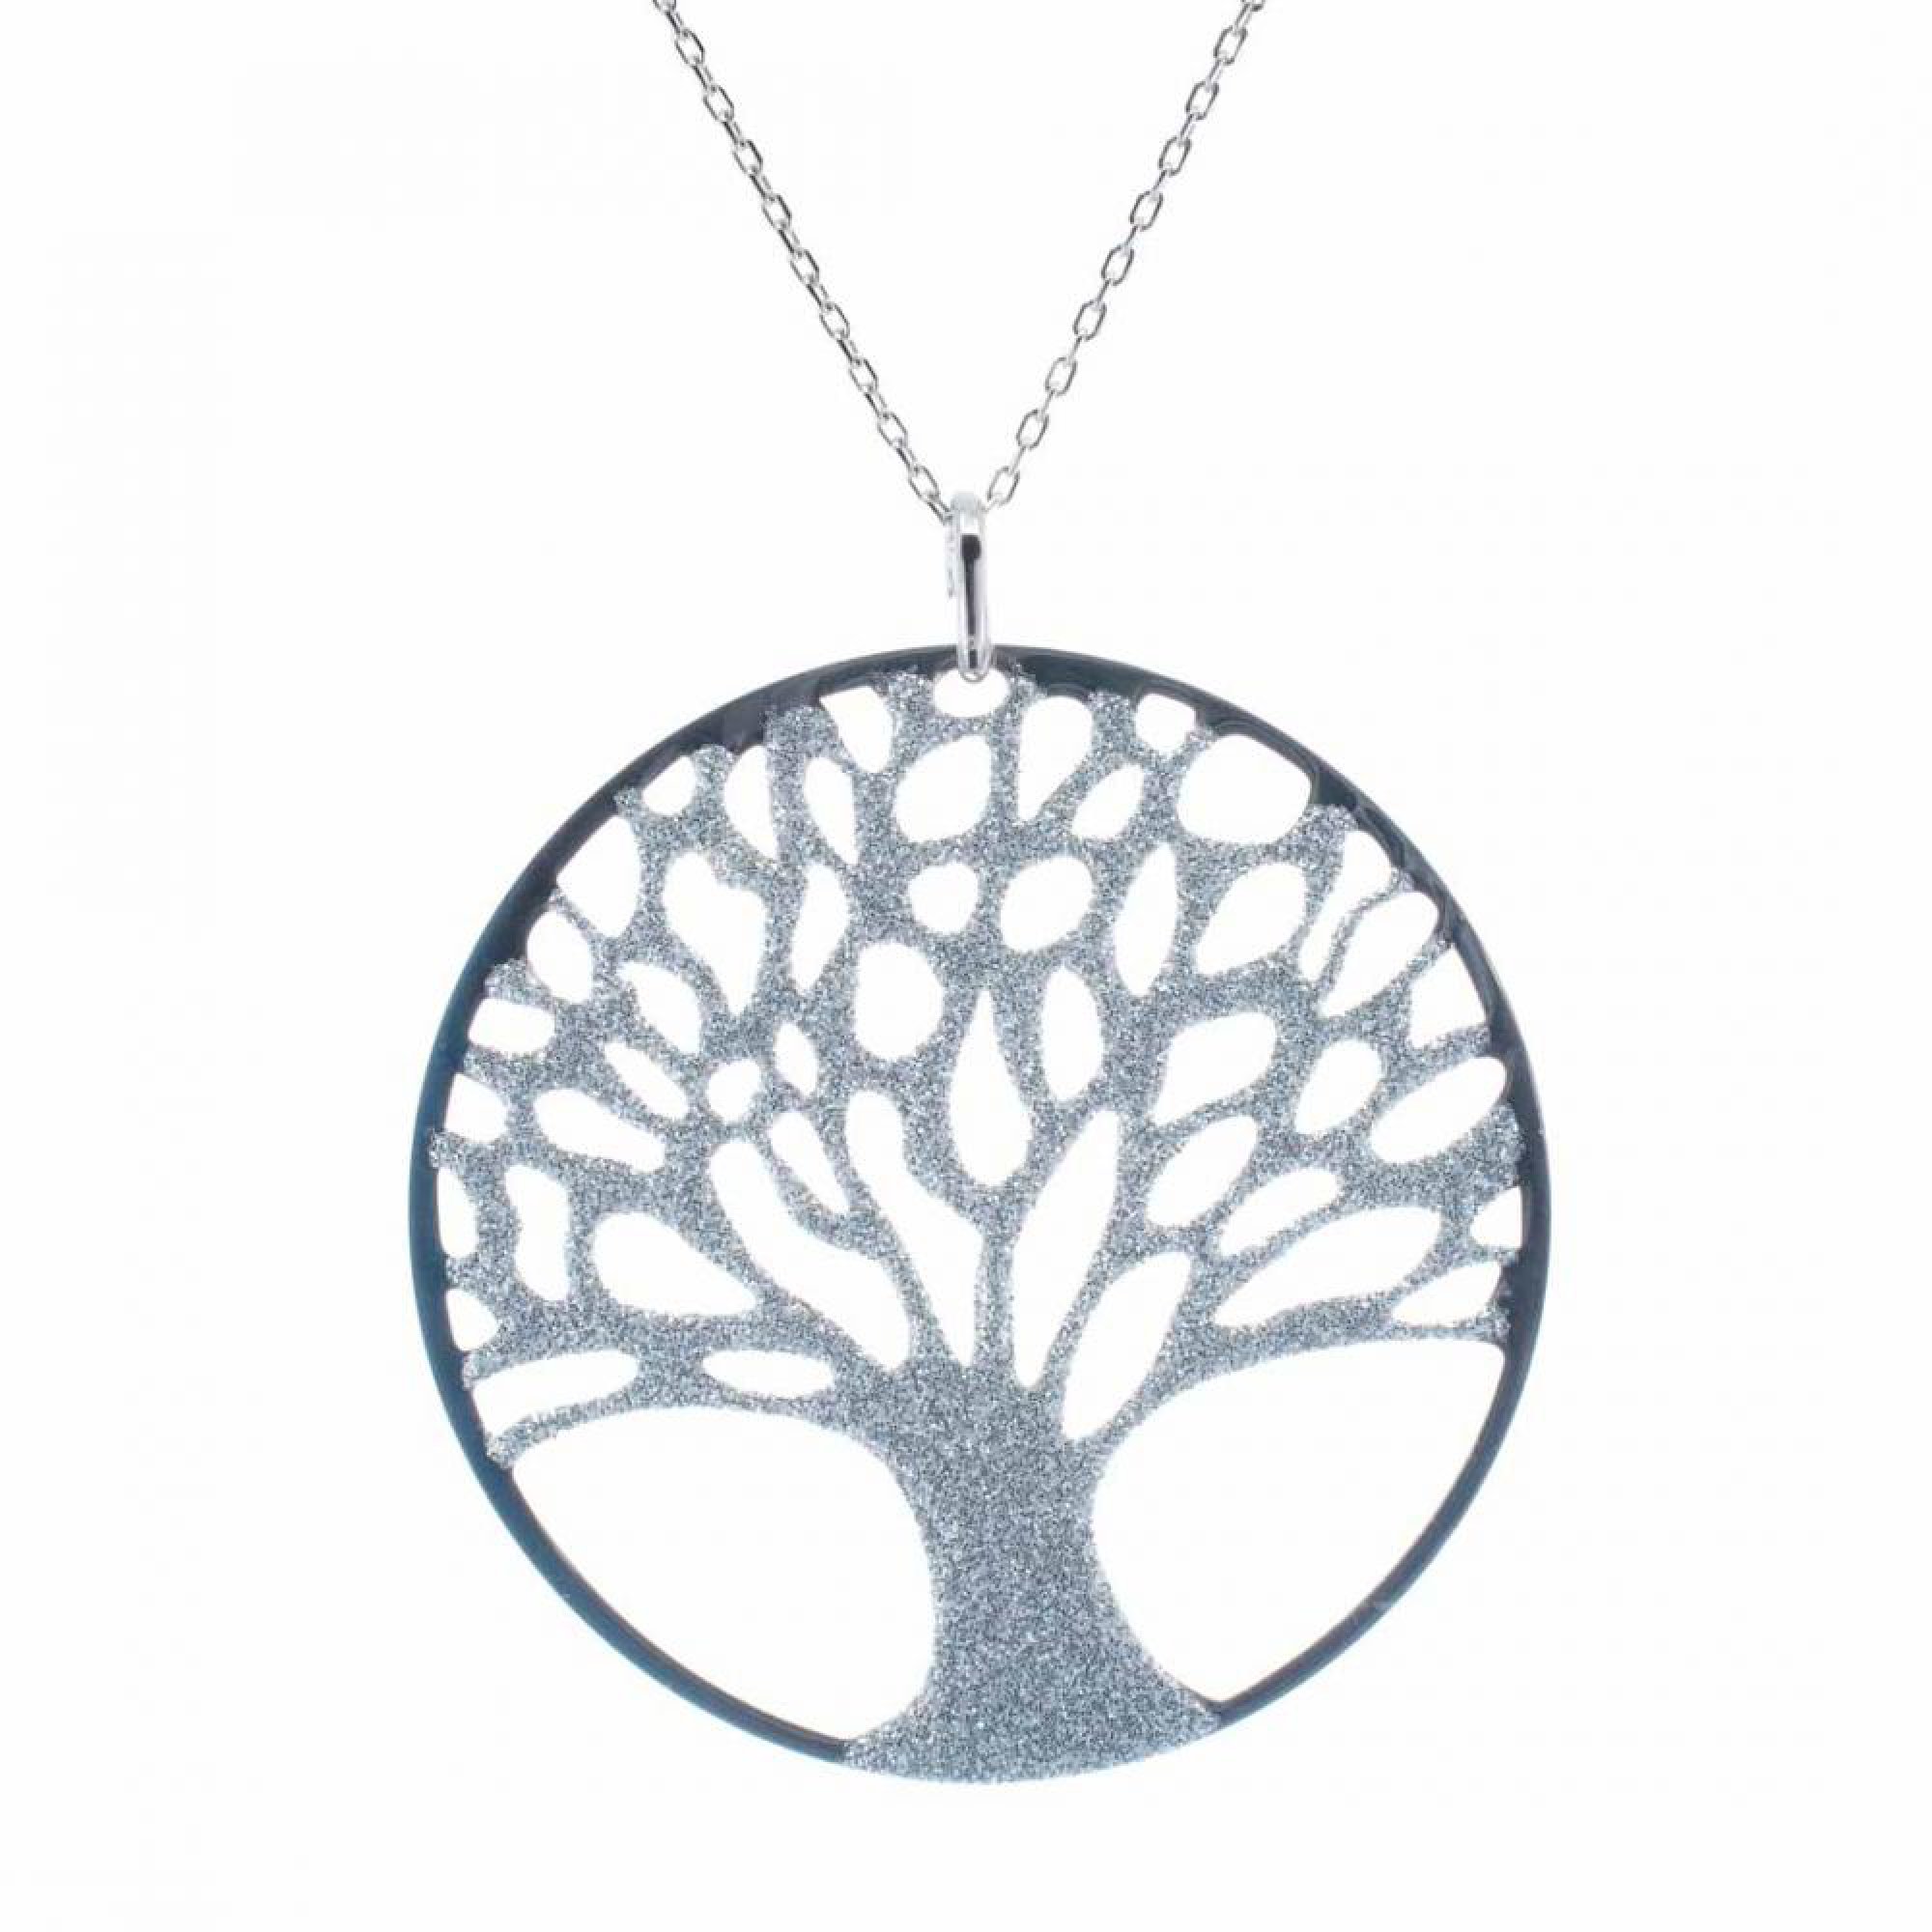 Tree of life necklace with glitter